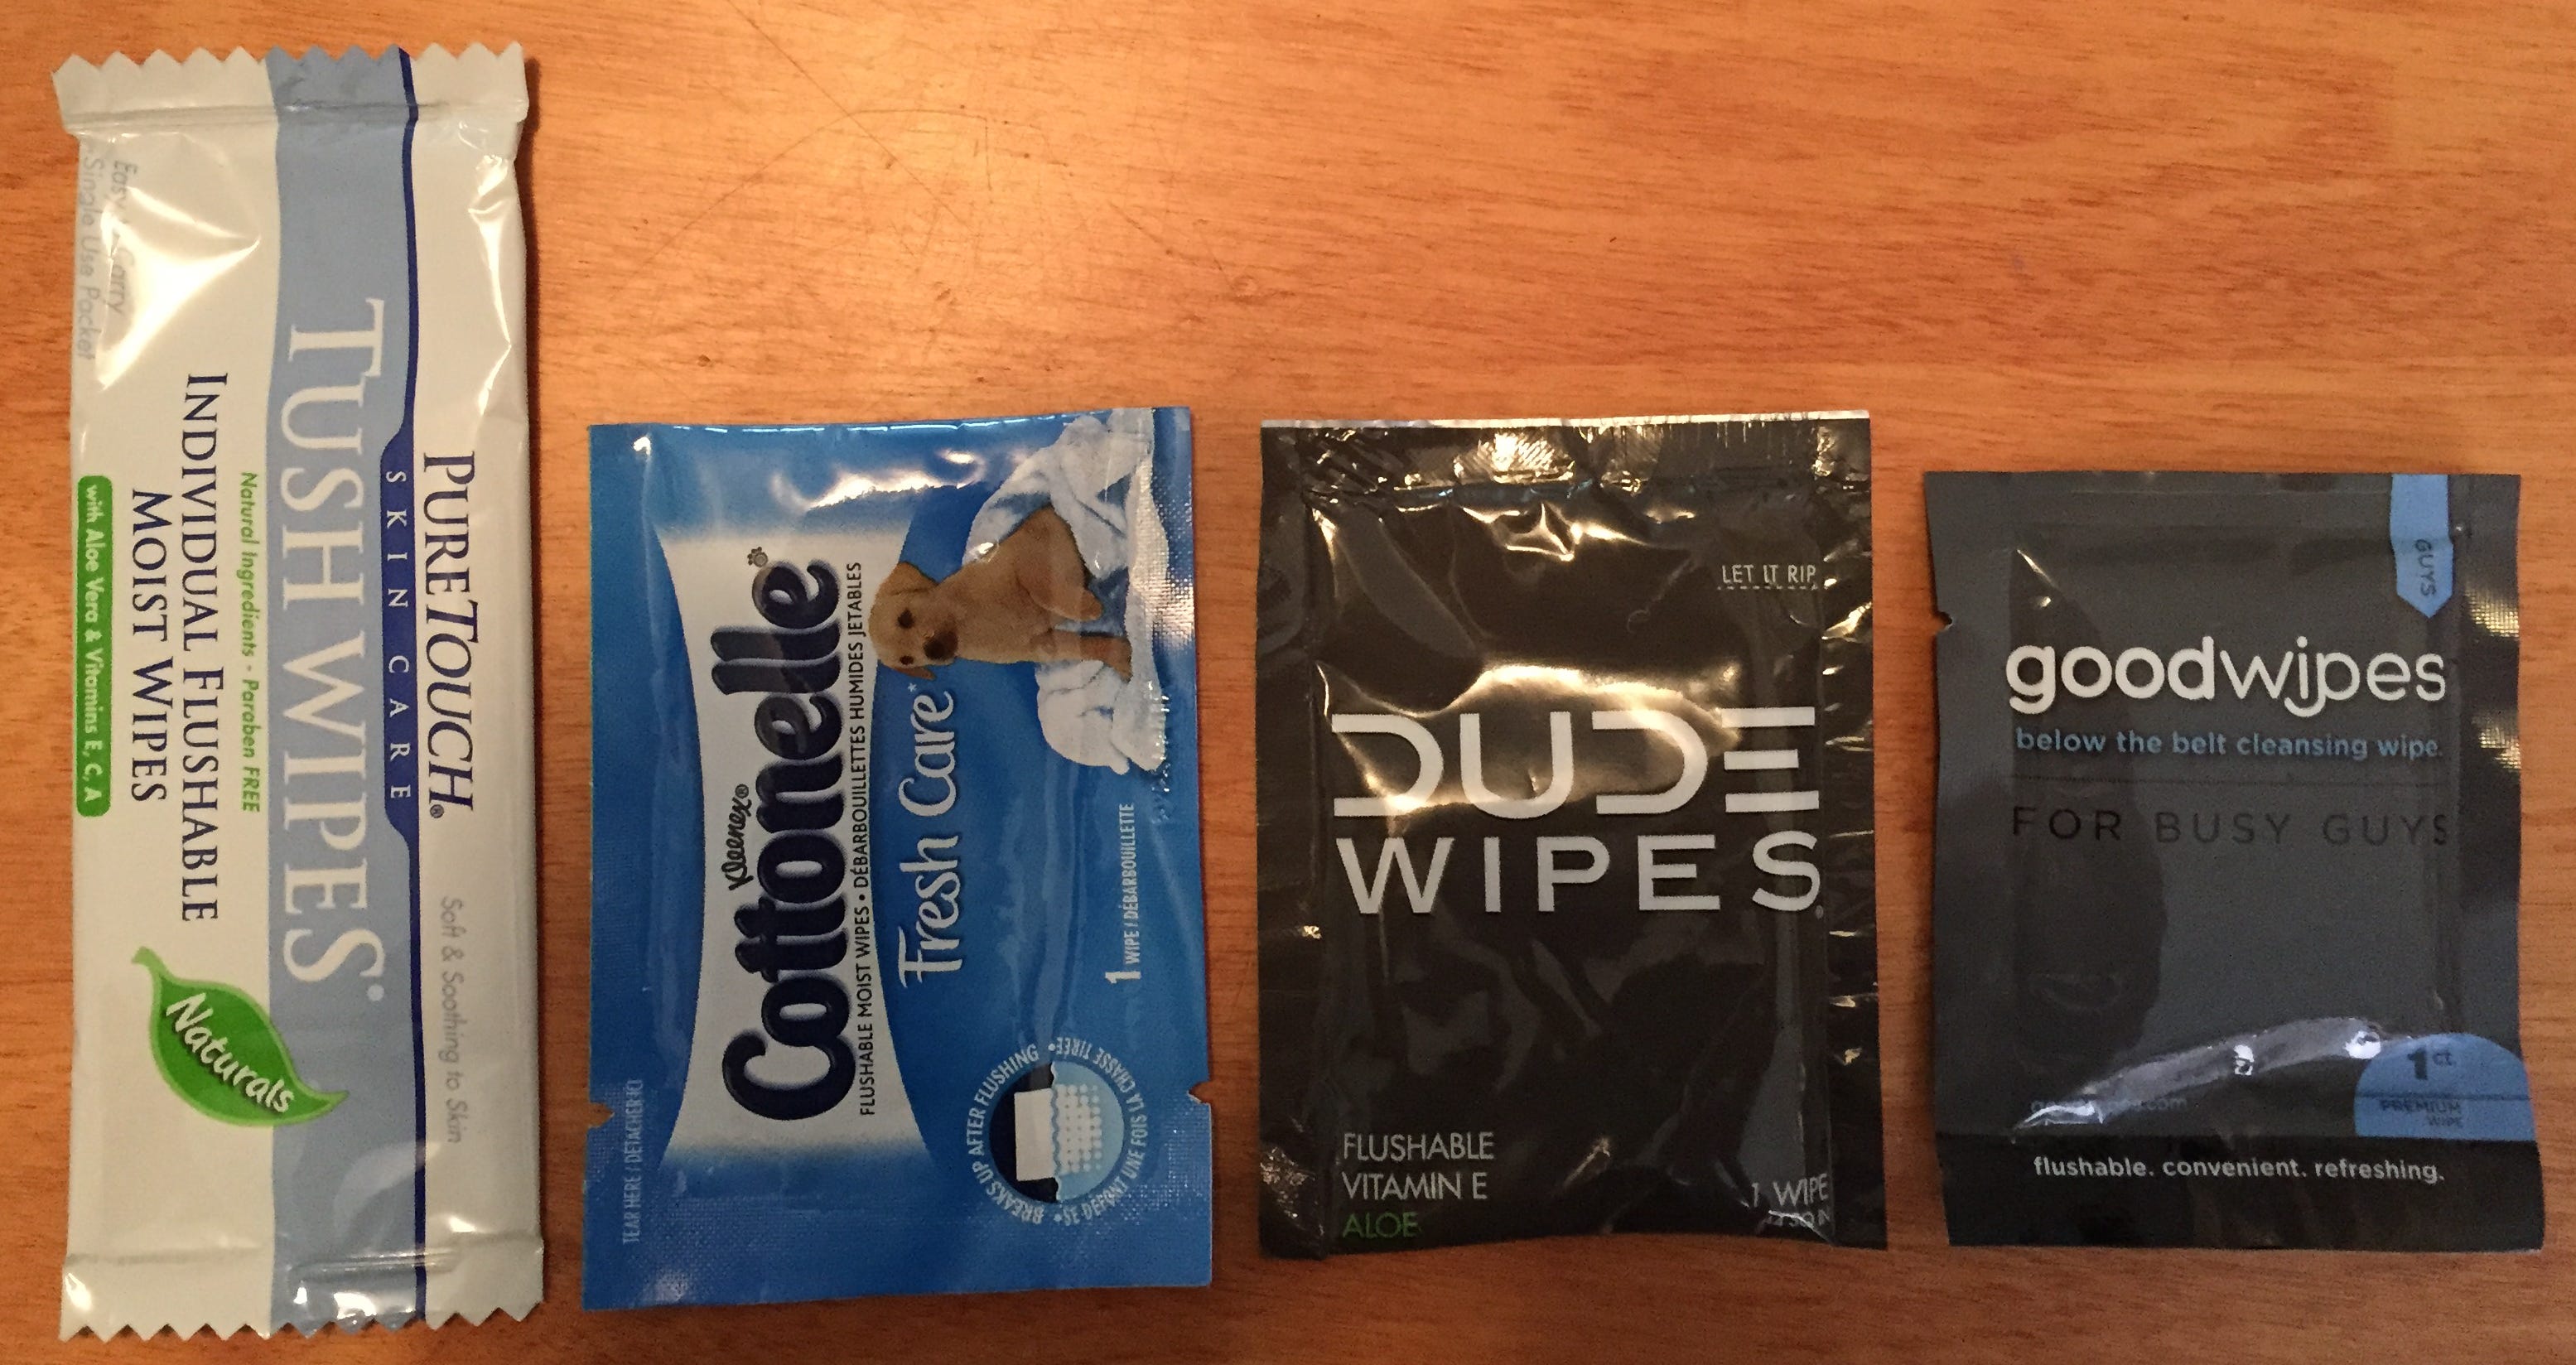 Which Single-Use Butt Wipe Brand is the Best?